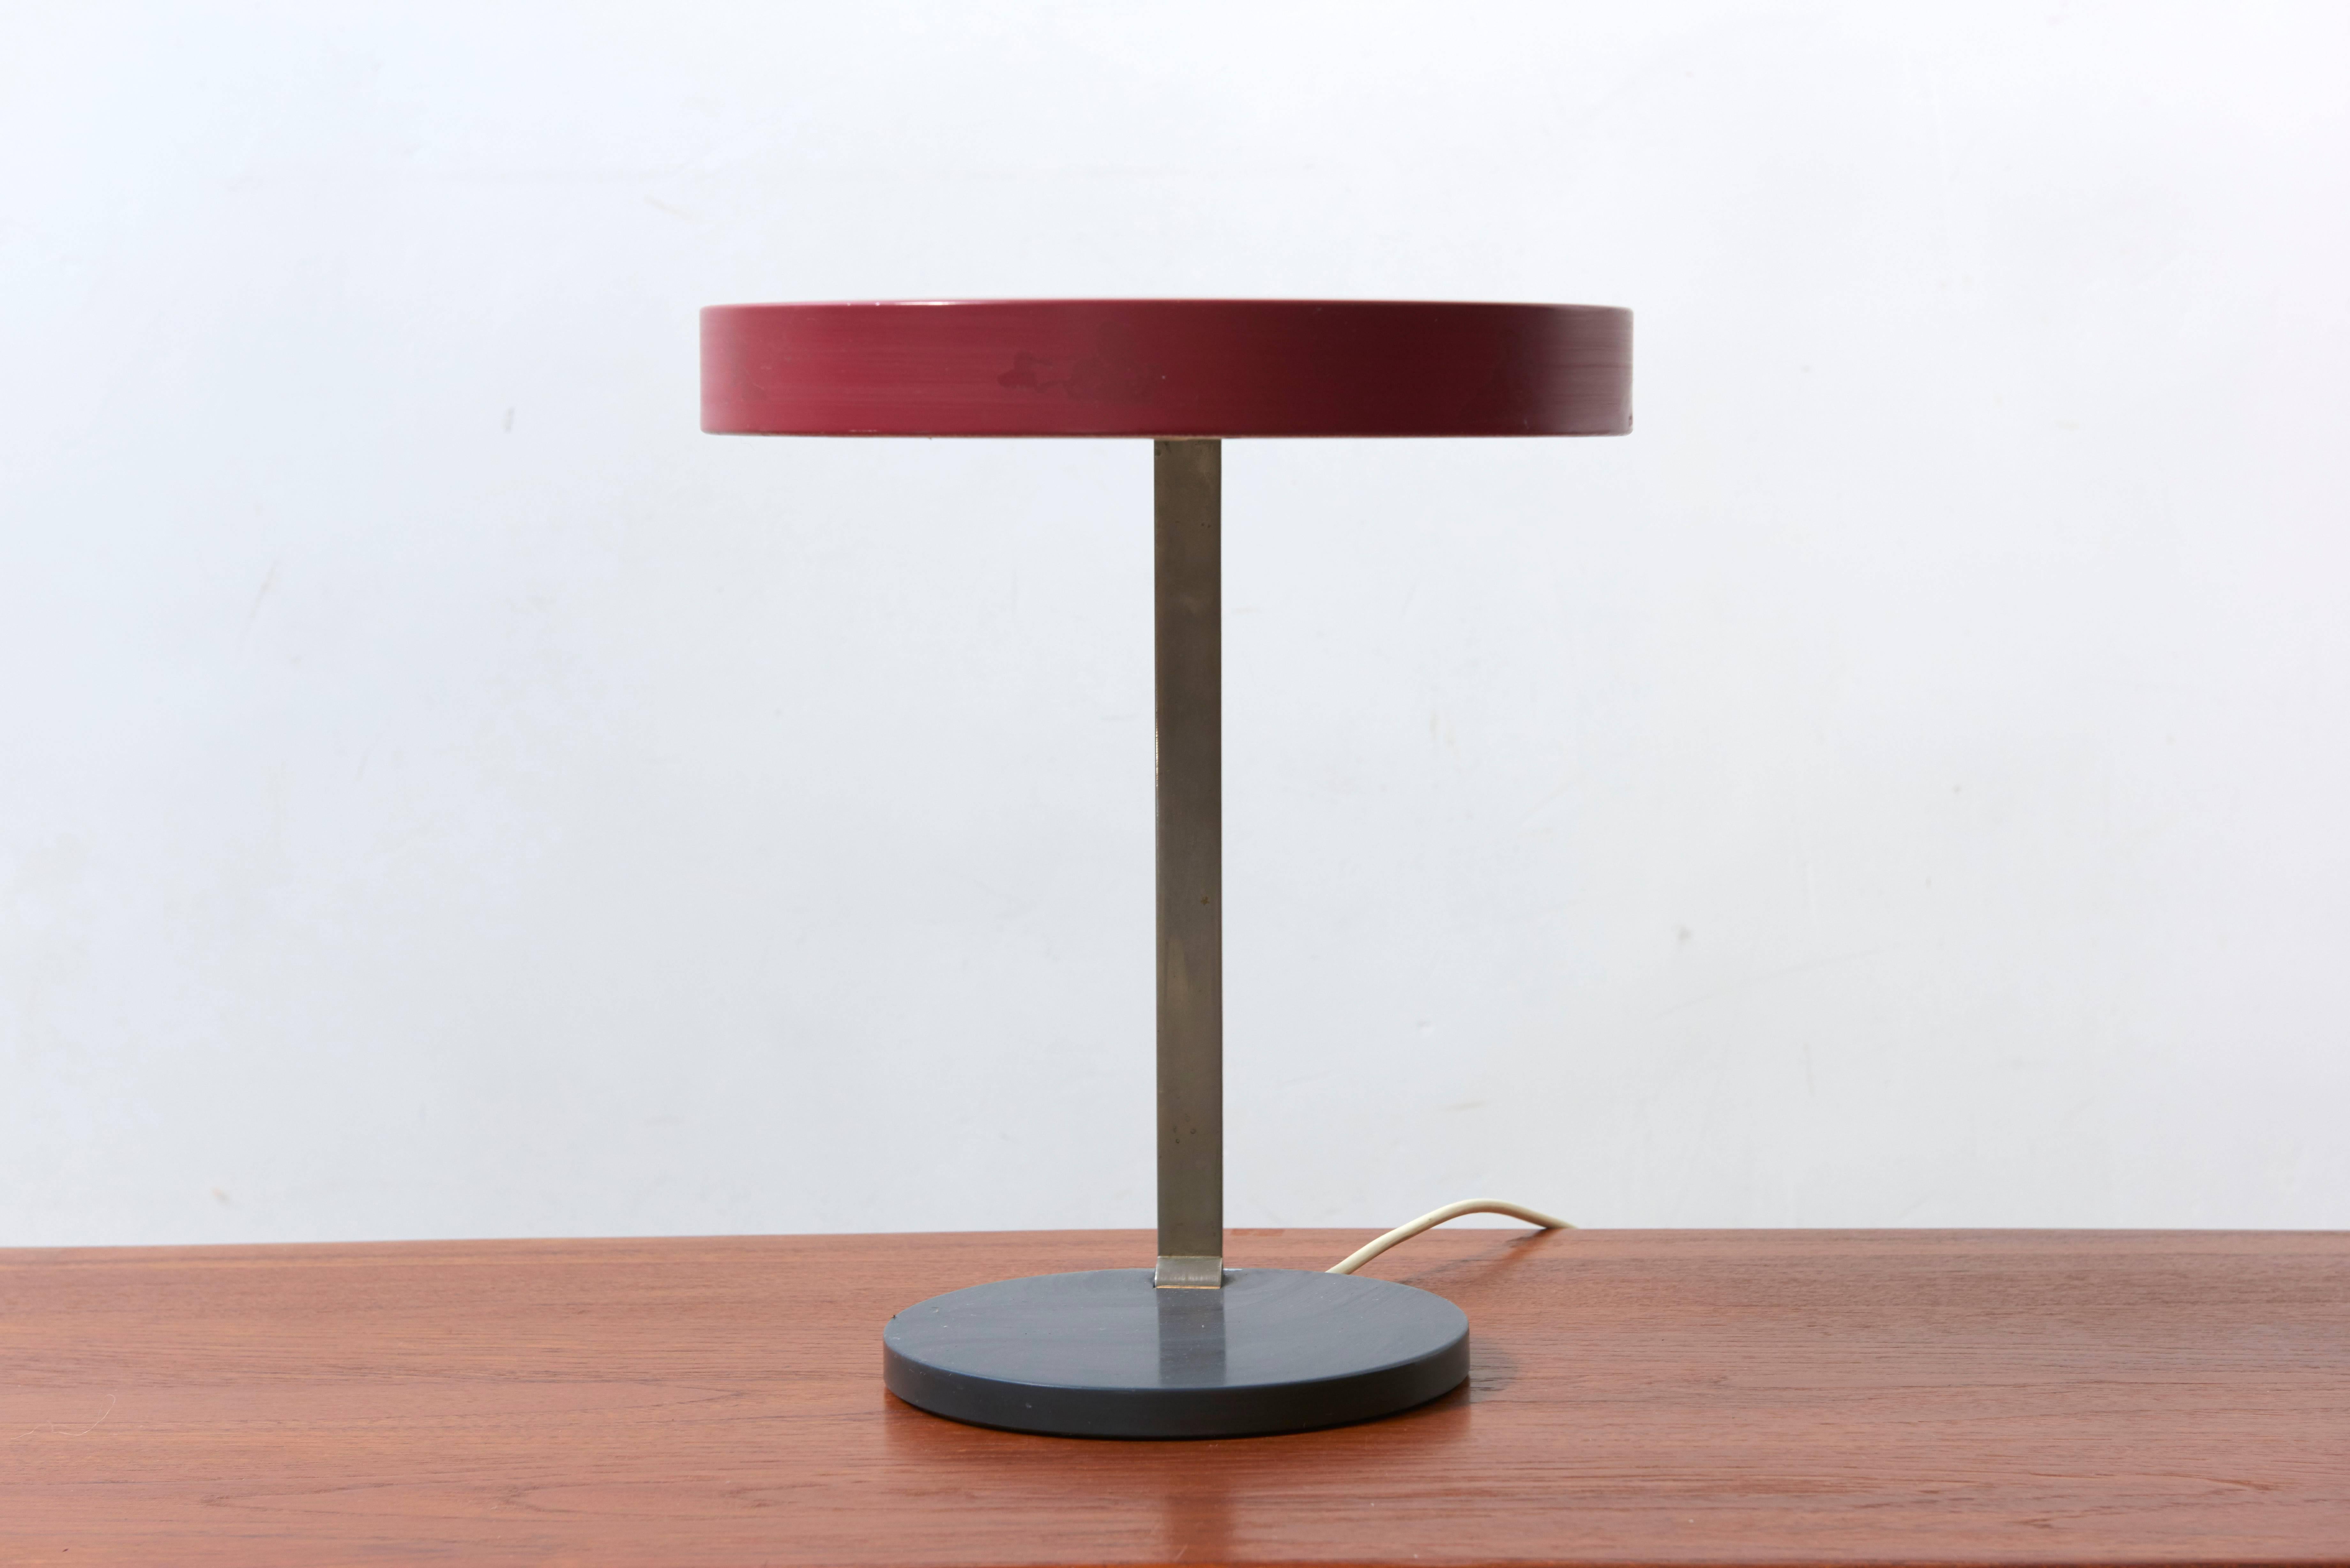 Adjustable desk lamp with an enameled red shade connected by a nickel stem and grey enameled base, by Bauhaus designer Christian Dell. Labeled by Kaiser Leuchten.

The most famous work of Bauhaus designer Christian Dell, the Kaiser Idell lighting